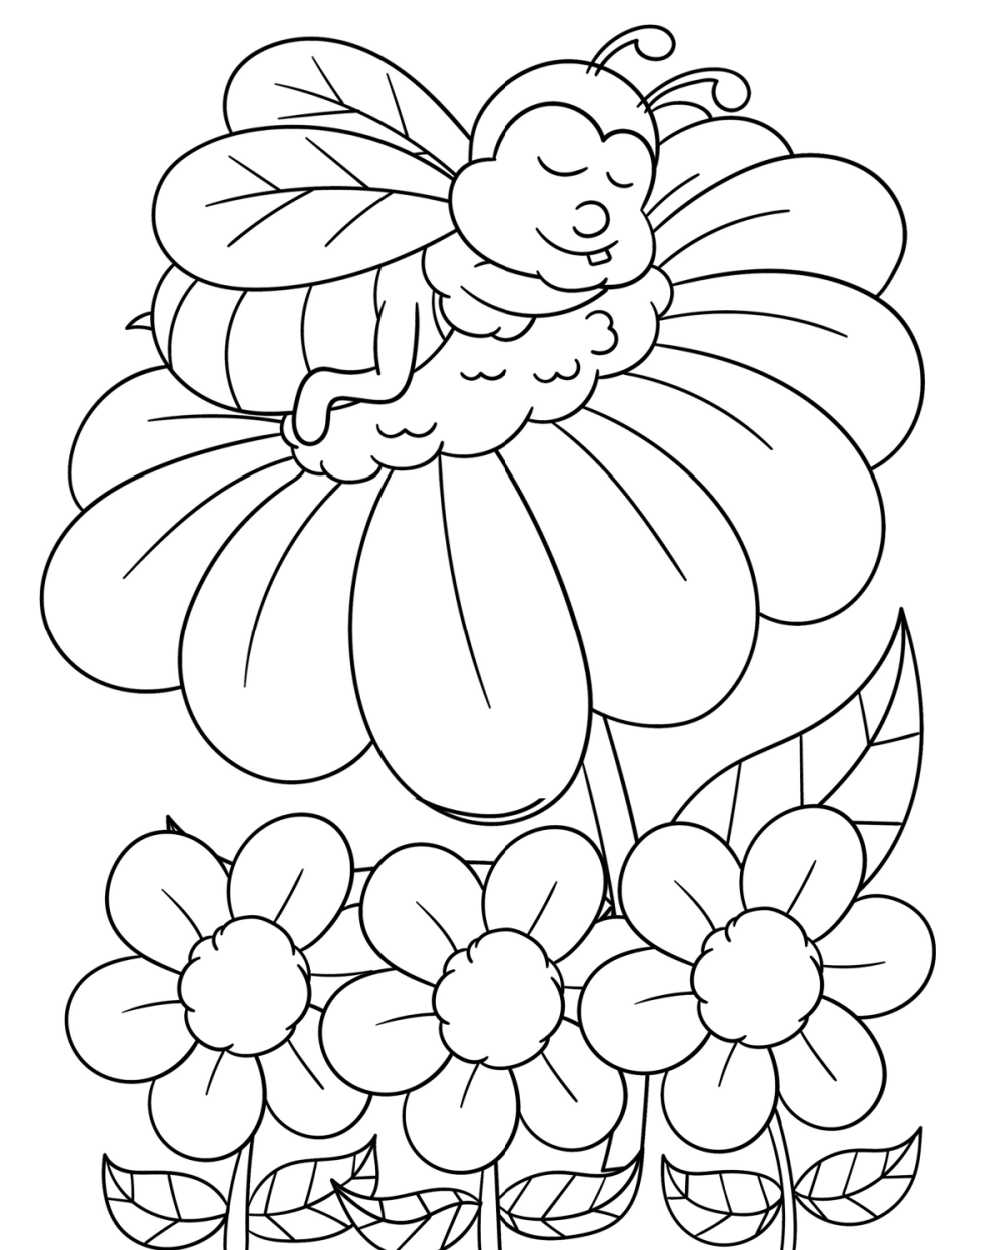 It is hard work for bees to make honey, but this adorable bee napping on a flower coloring page is fun to color. 